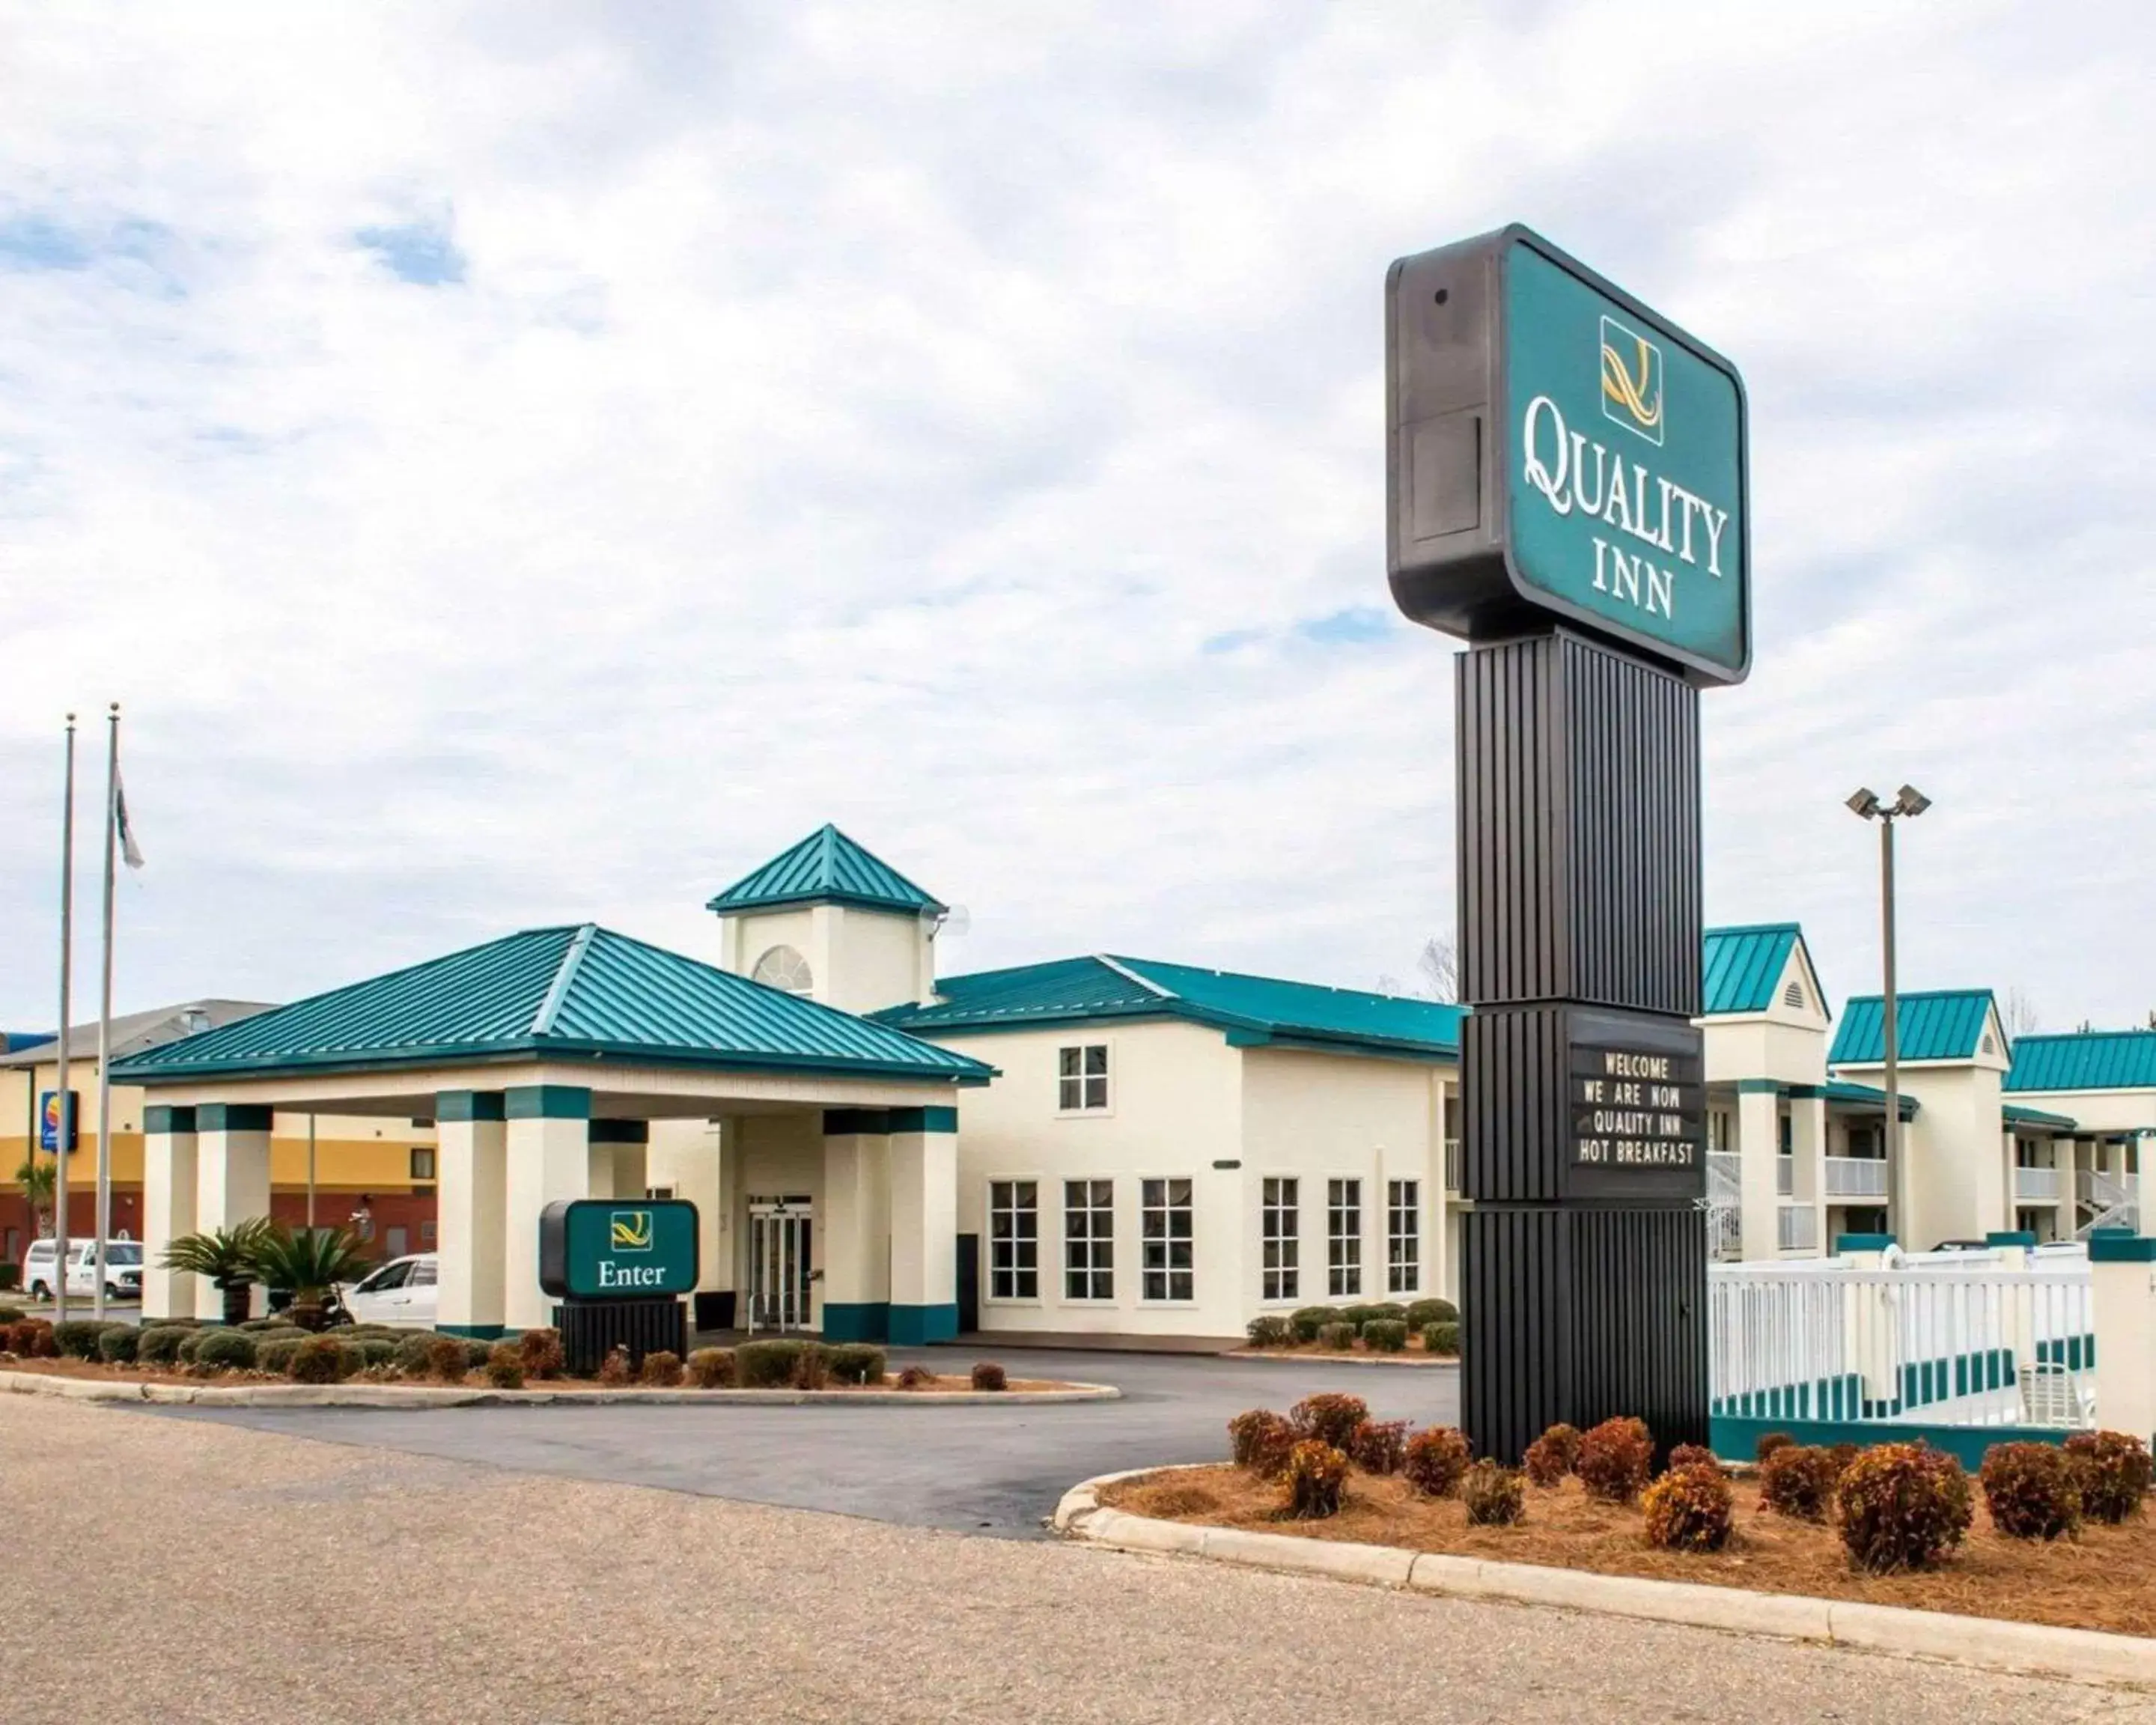 Property Building in Quality Inn Chipley I-10 at Exit 120